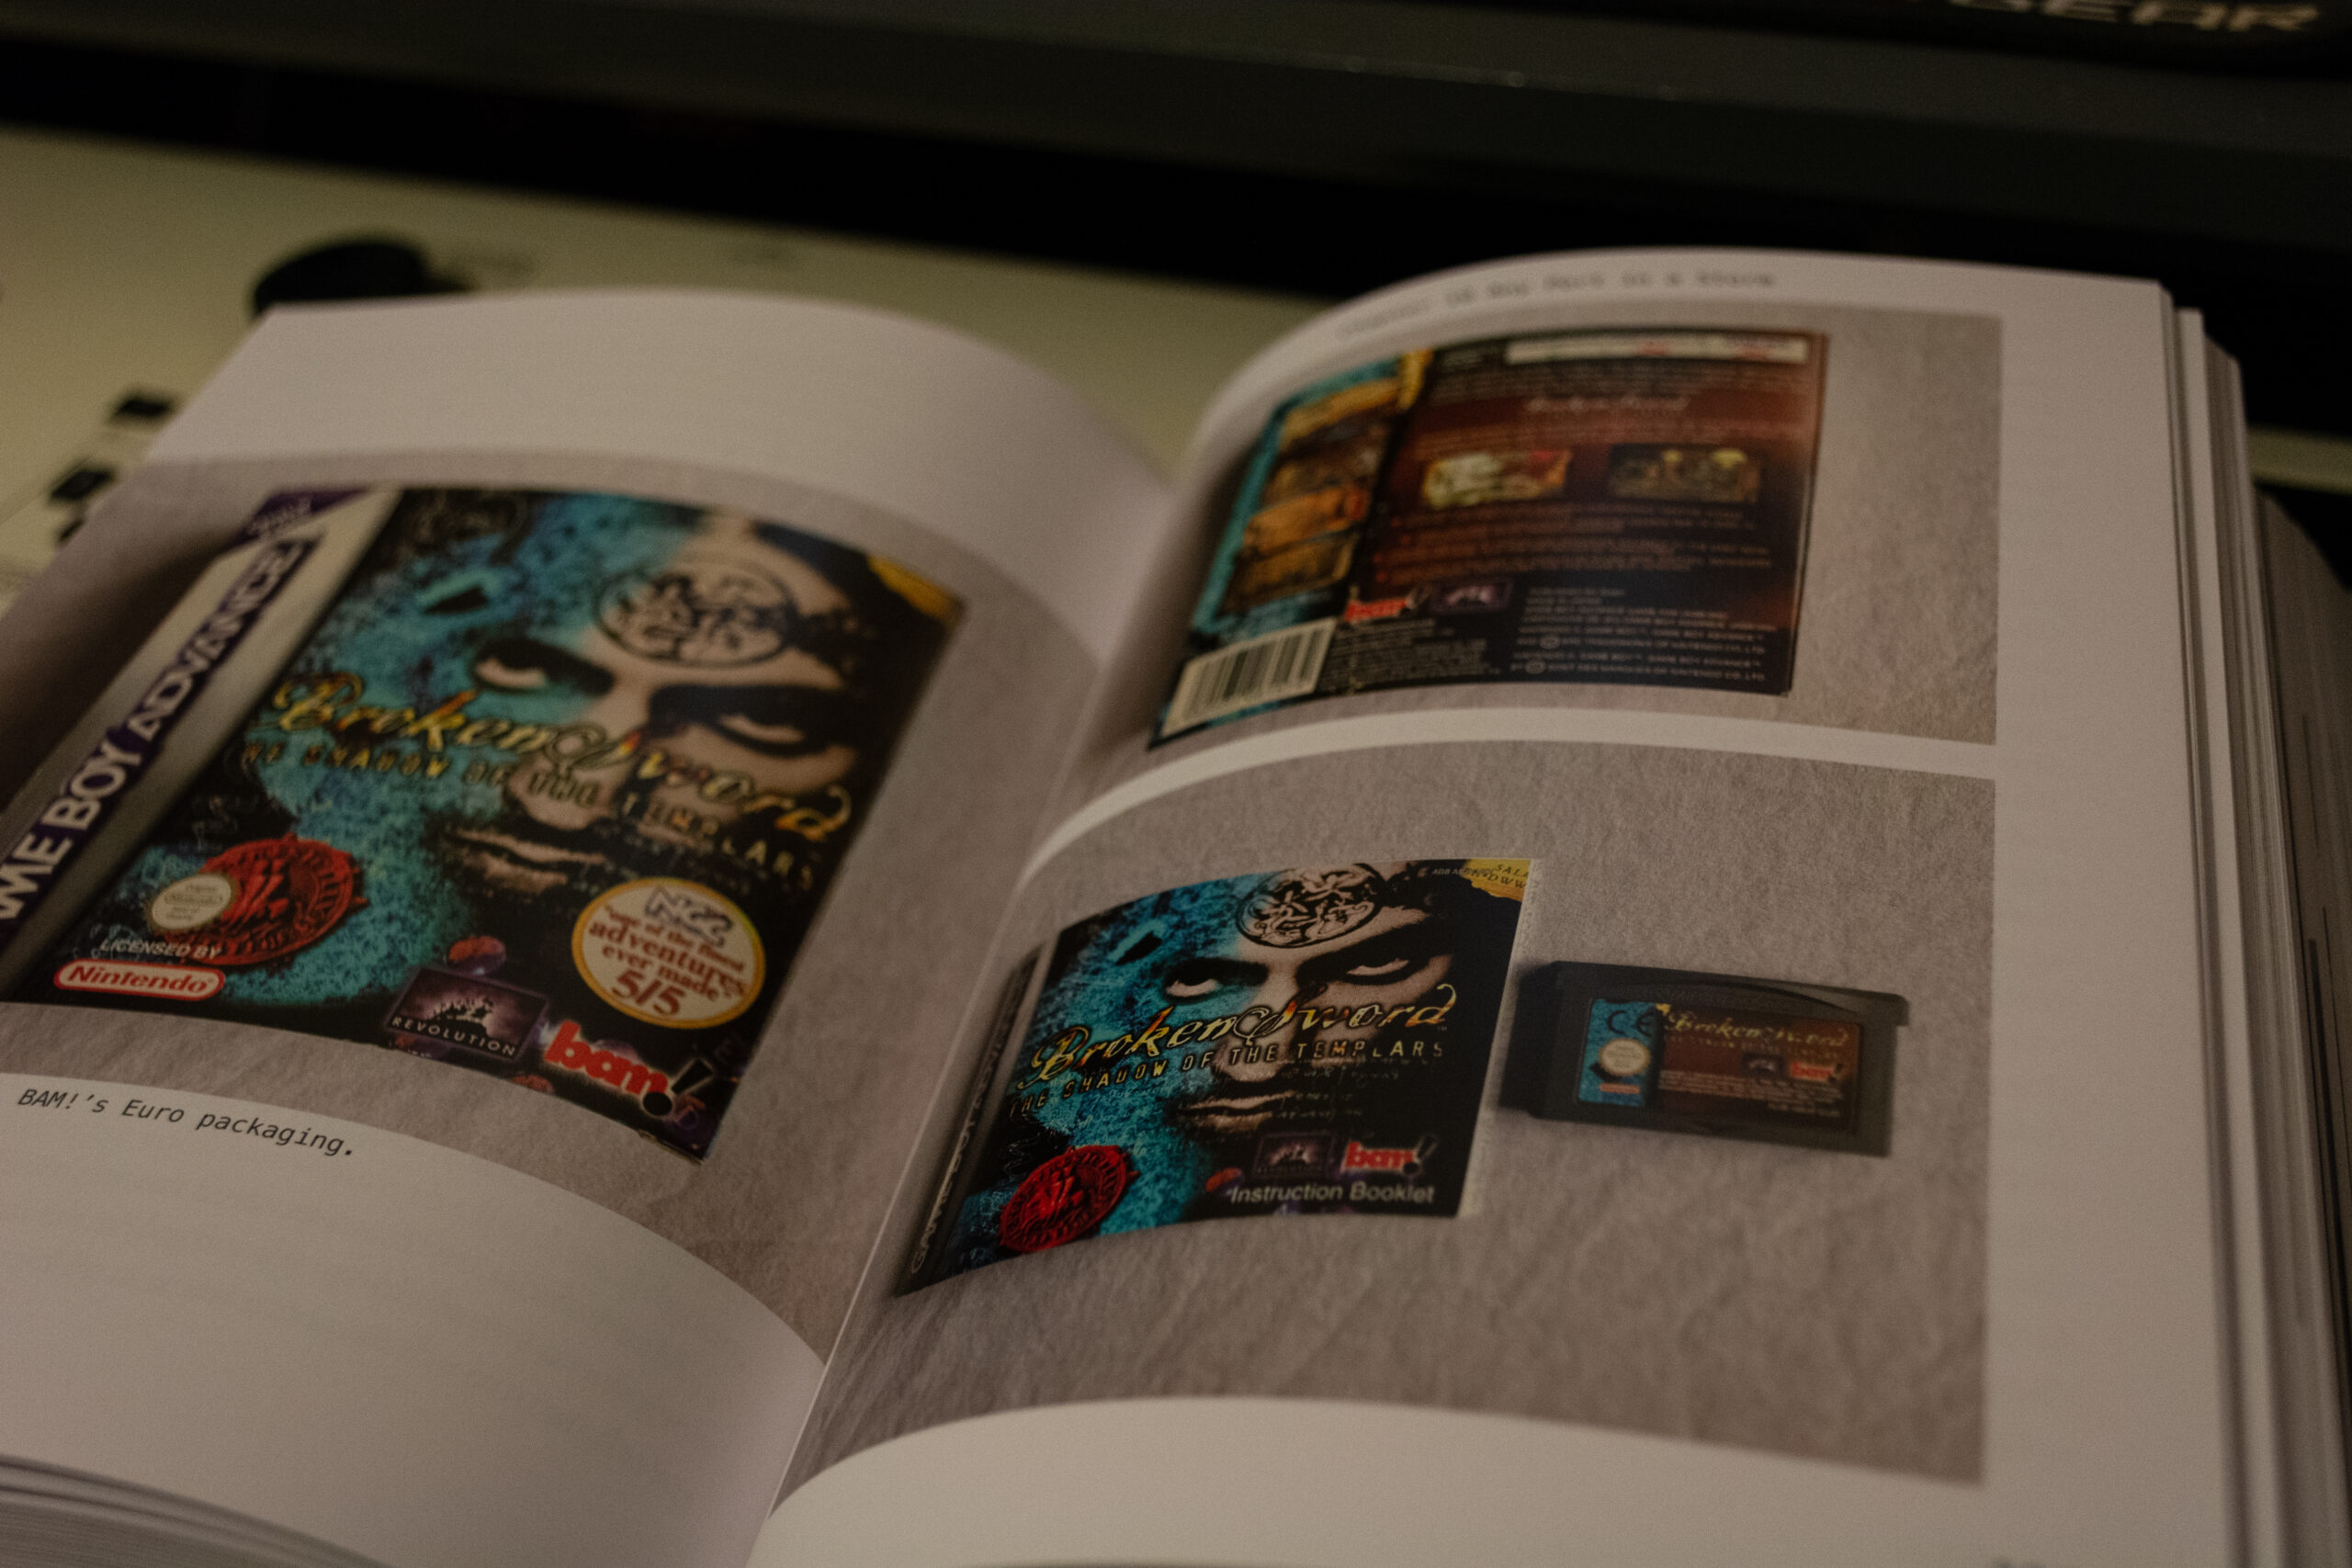 Broken Sword: The Shadow of the Templars for Game Boy Advance in Tony Warriner - Revolution: The Quest for Game Development Greatness book